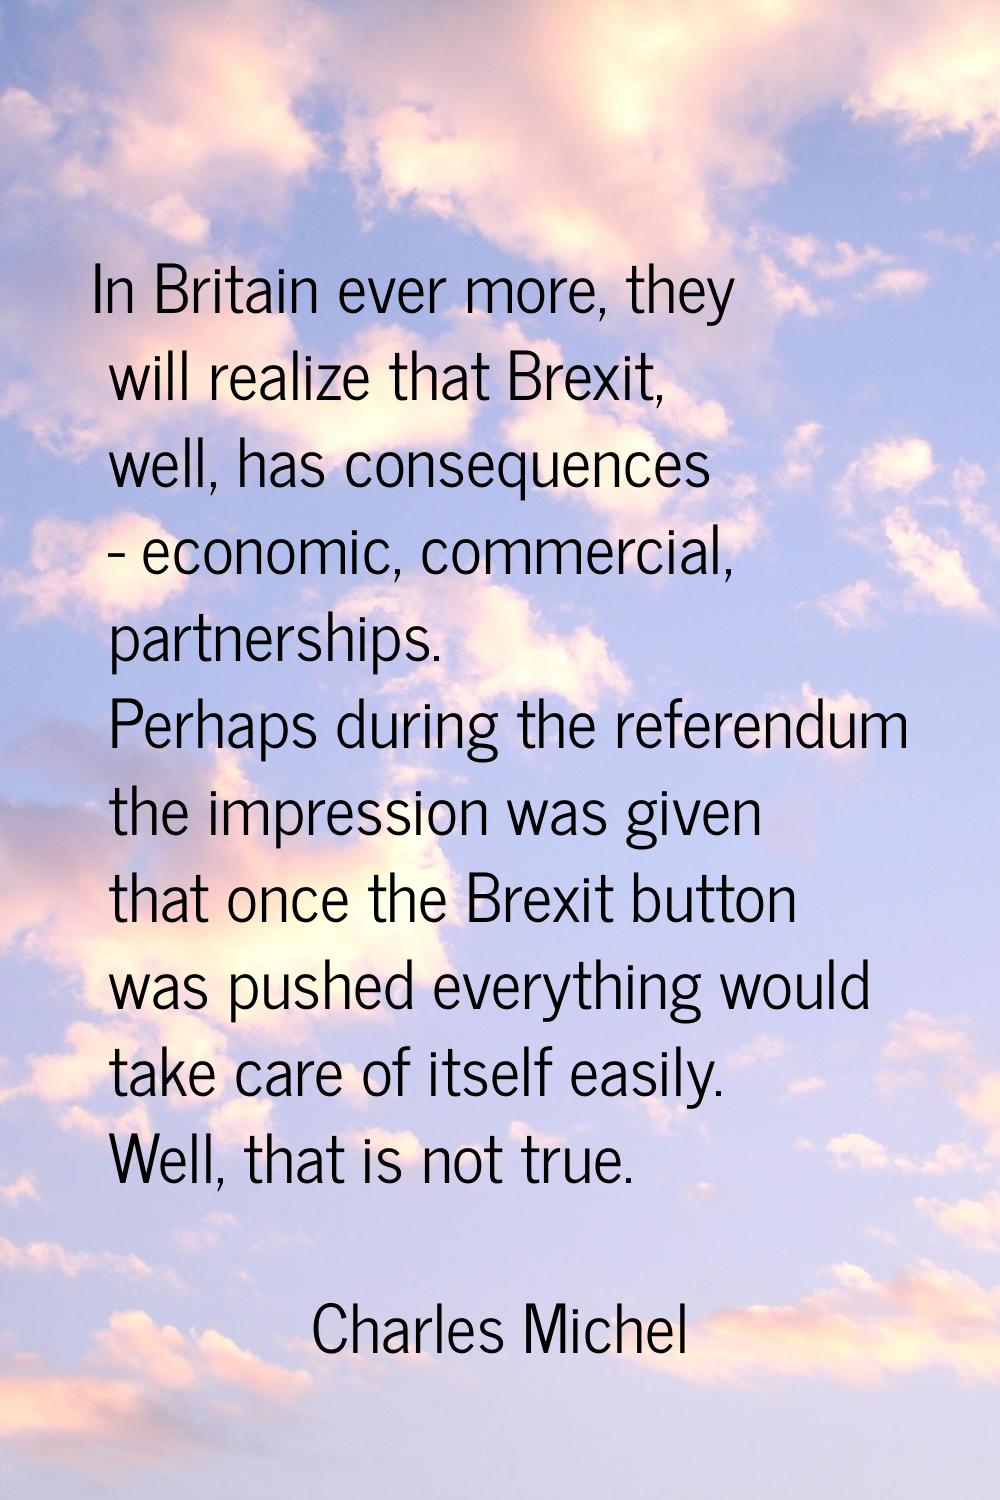 In Britain ever more, they will realize that Brexit, well, has consequences - economic, commercial,